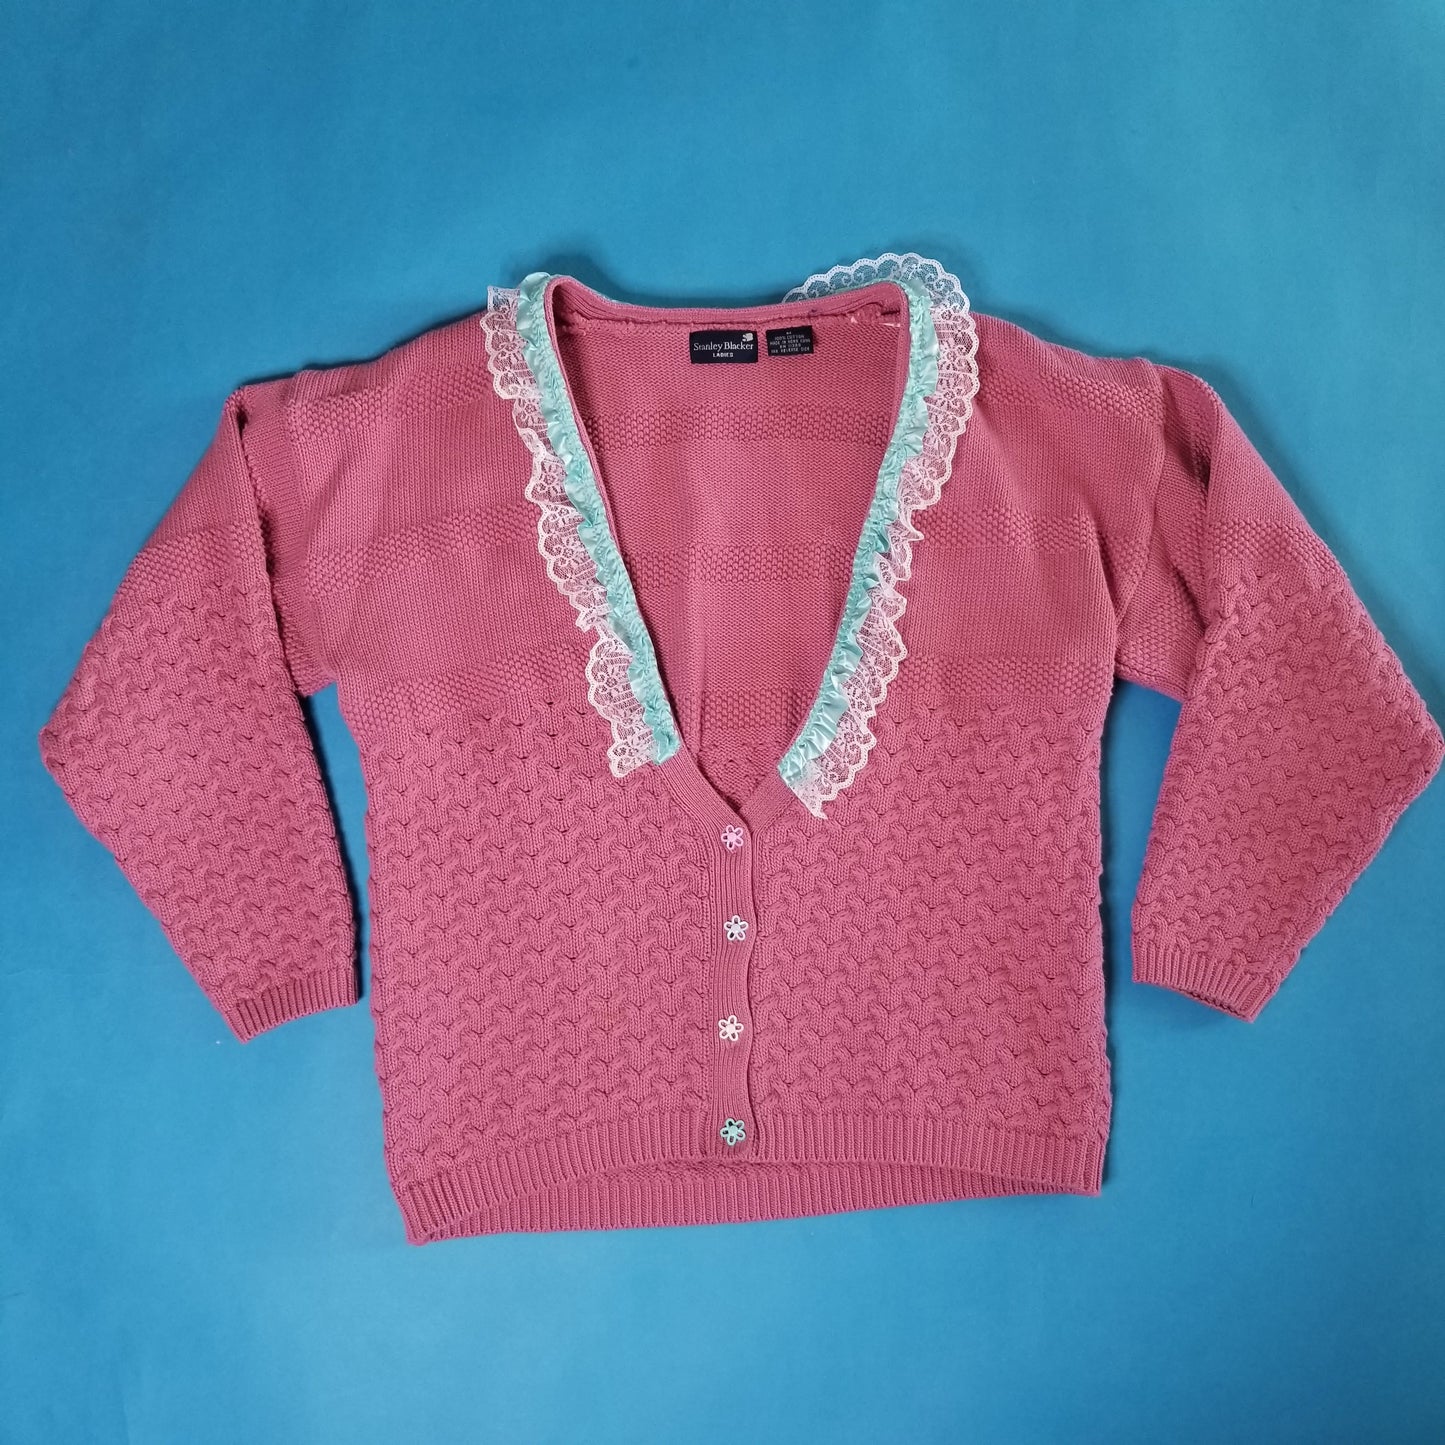 Tea time upcycled knit cardigan